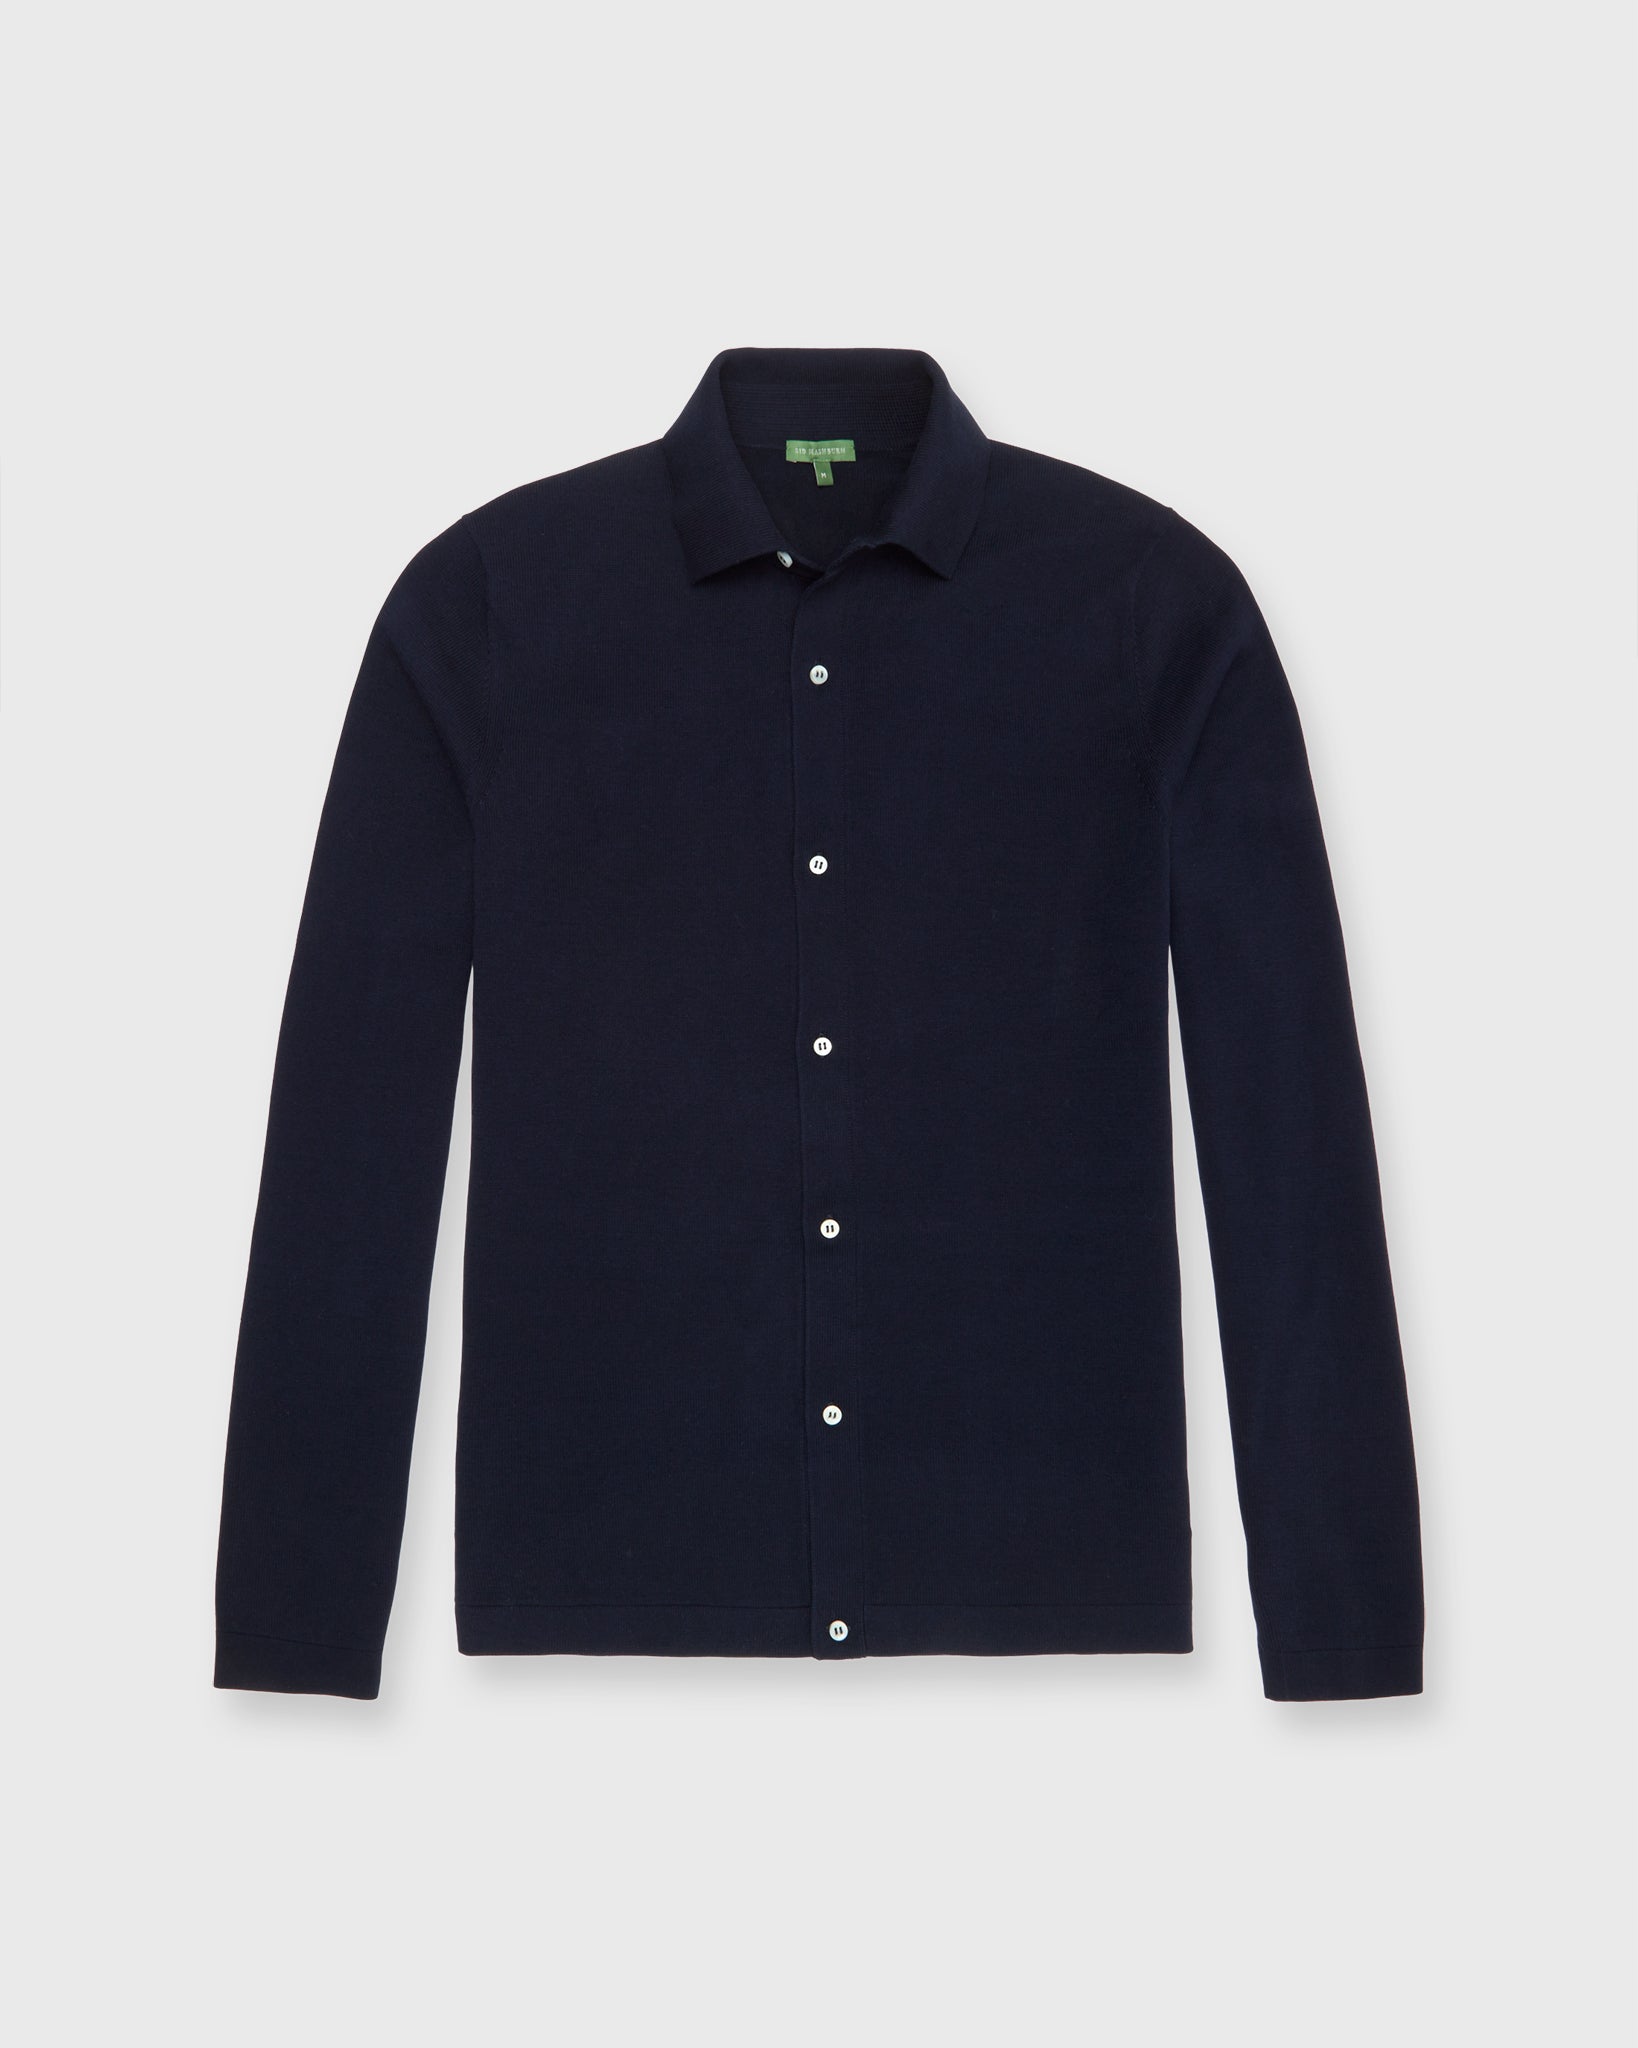 Long-Sleeved Full-Placket Sweater in Navy Cotton